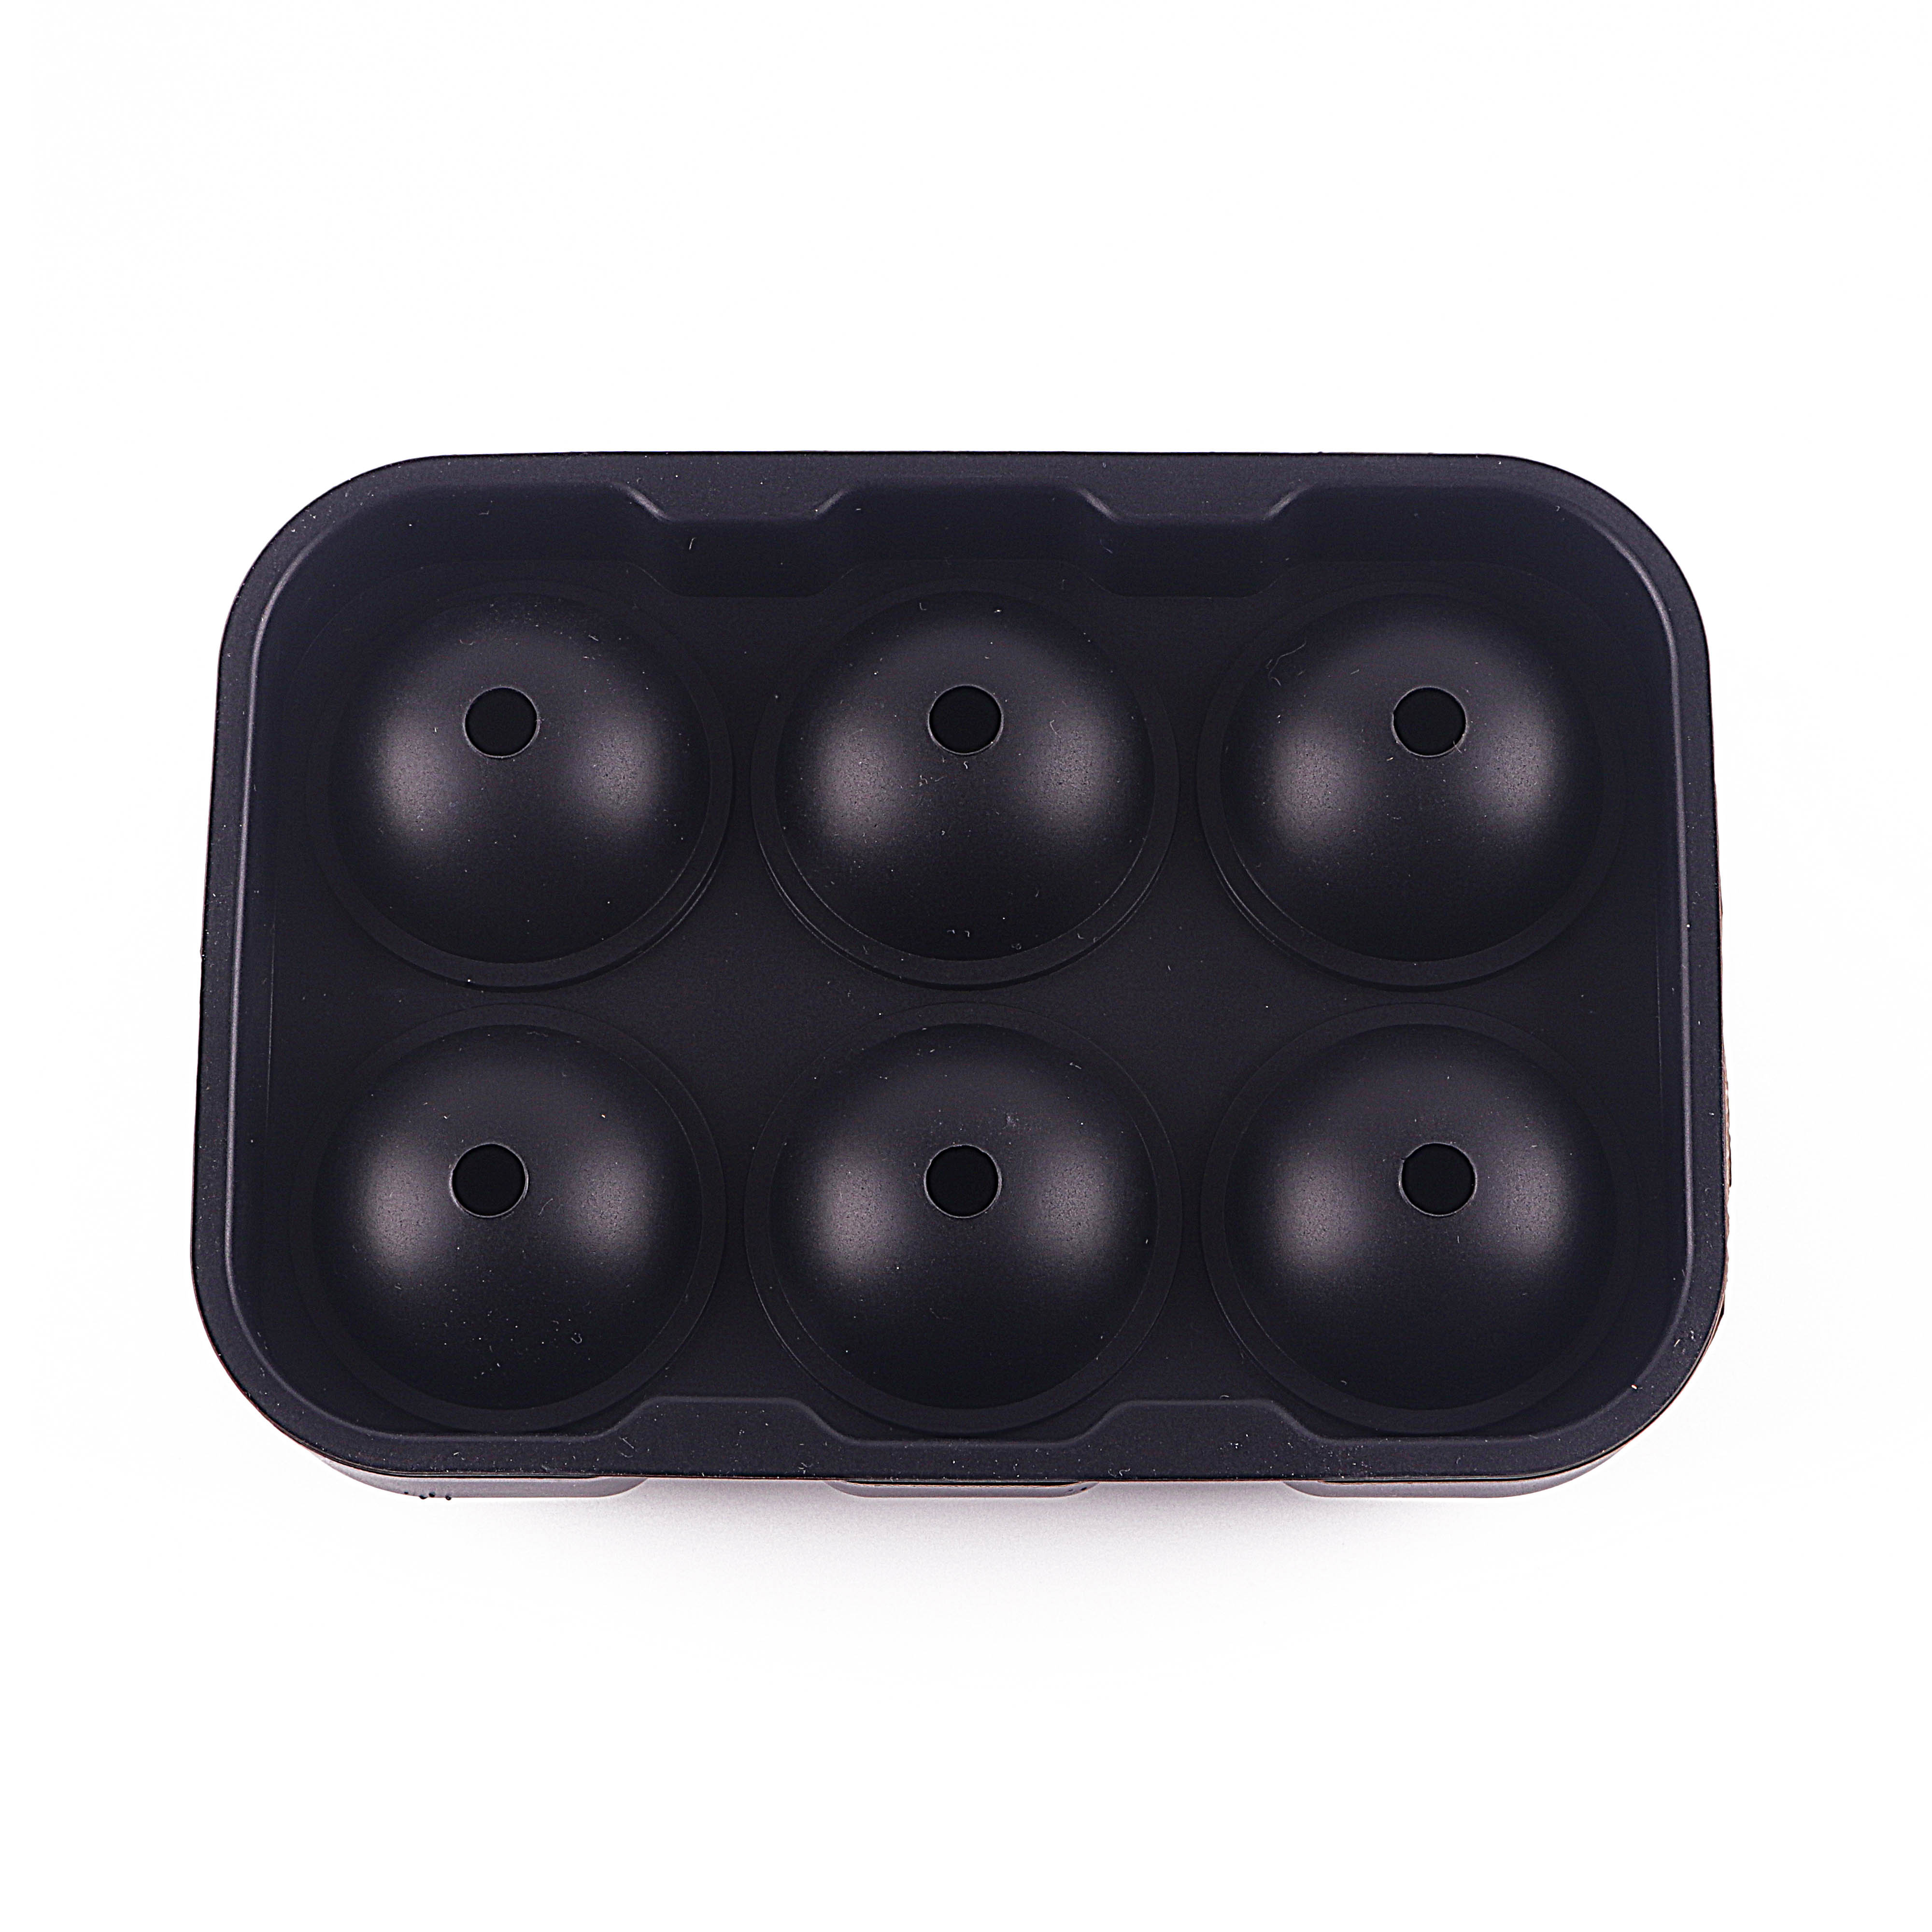 Best Whisky silicone ice ball mold with 6 ball